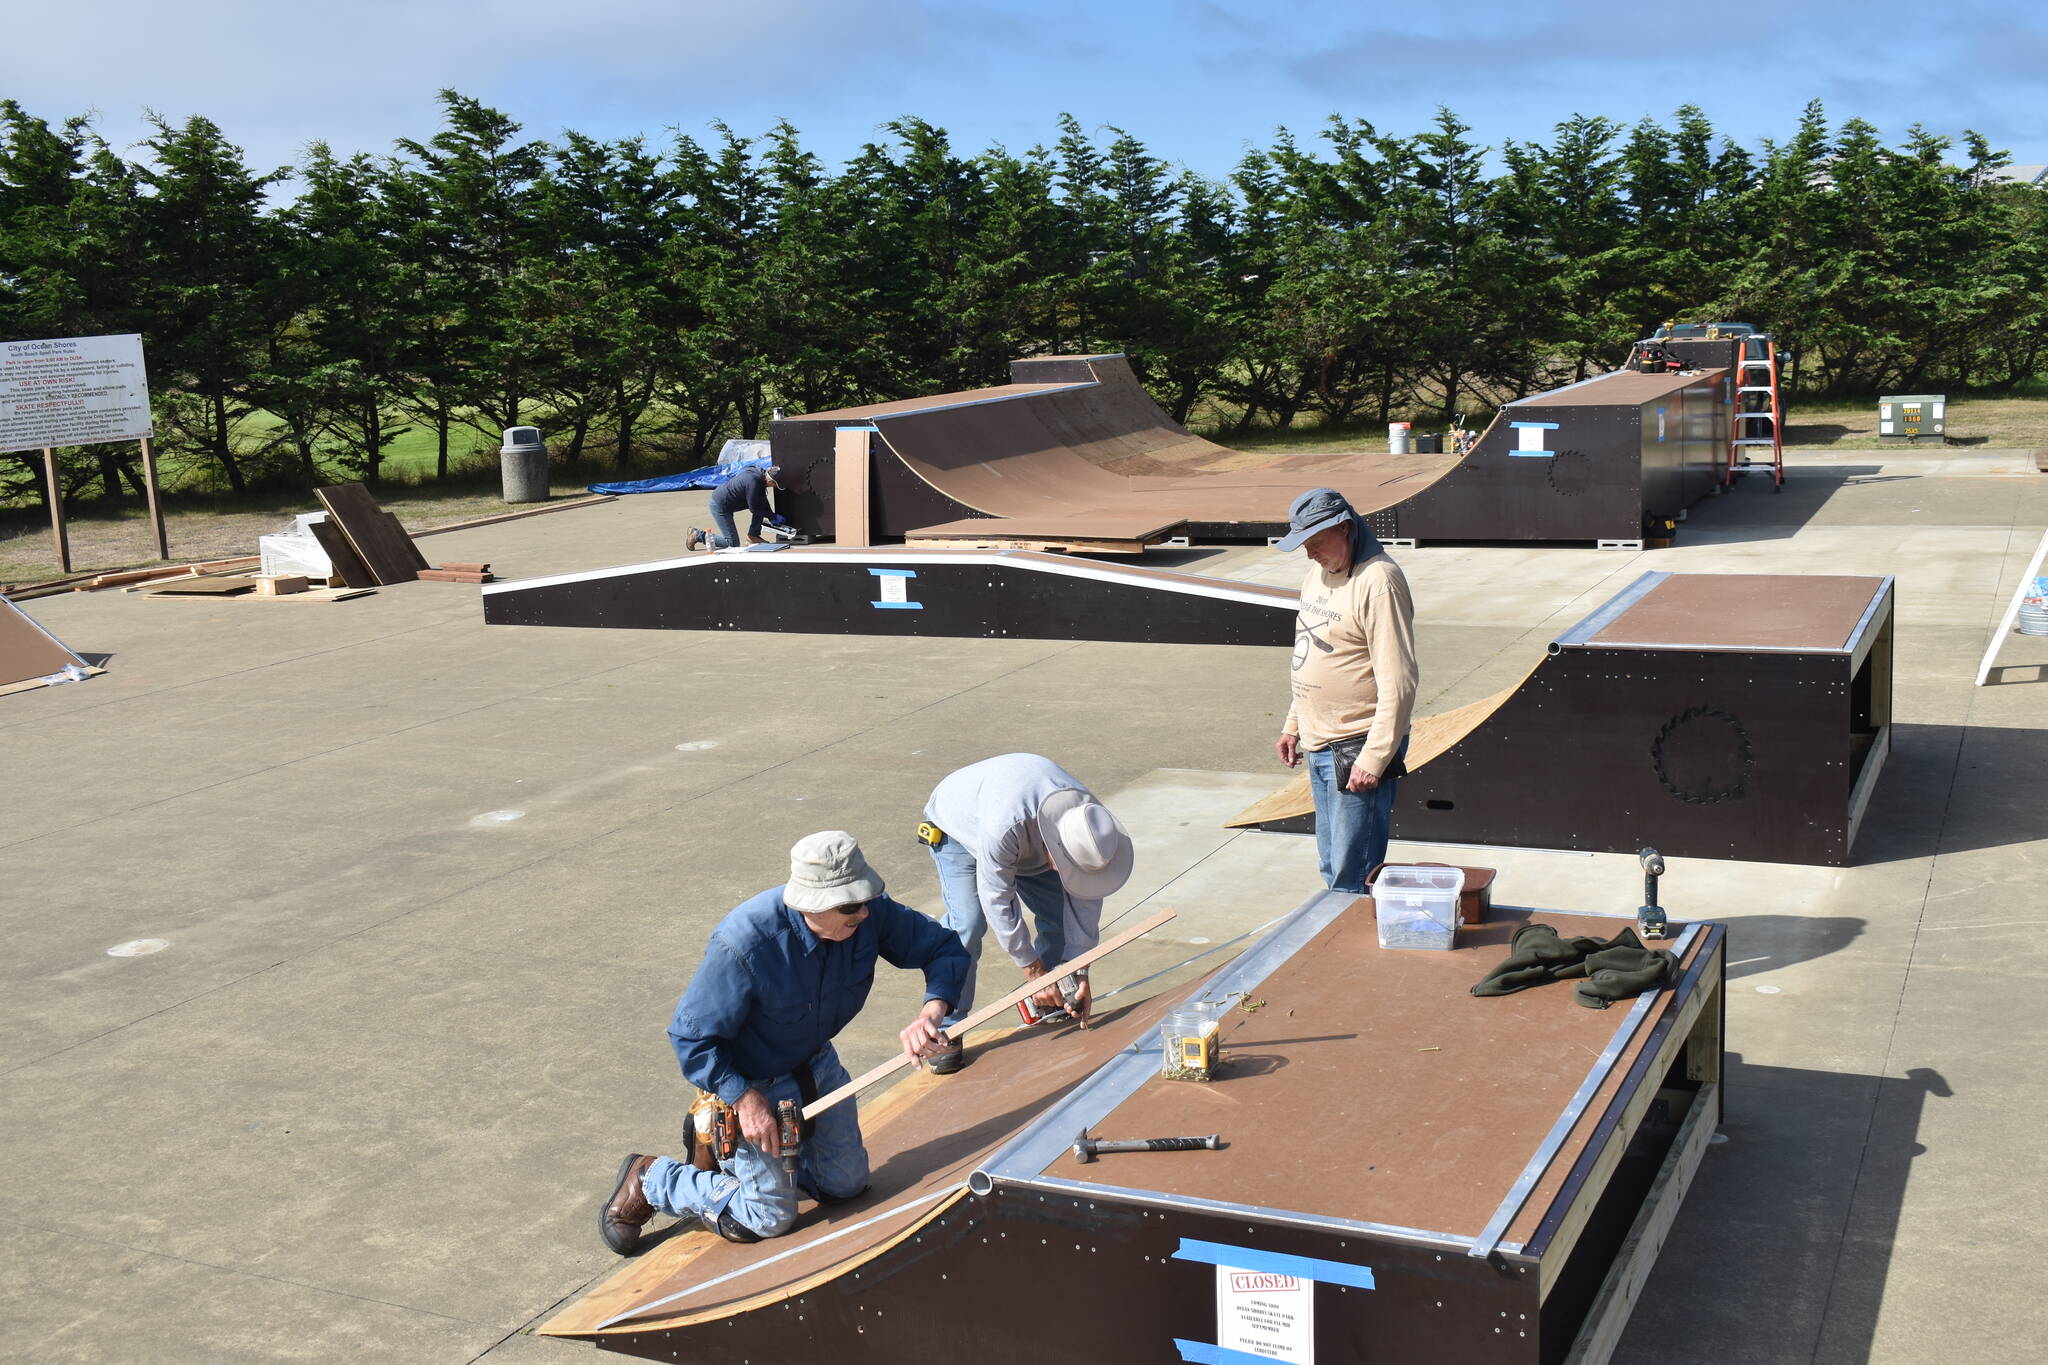 Clayton Franke / The Daily World
New features at the skatepark in Ocean Shores include a pair of two-foot ramps, a pair of four-foot ramps, a “hubba ledge” and a halfpipe.